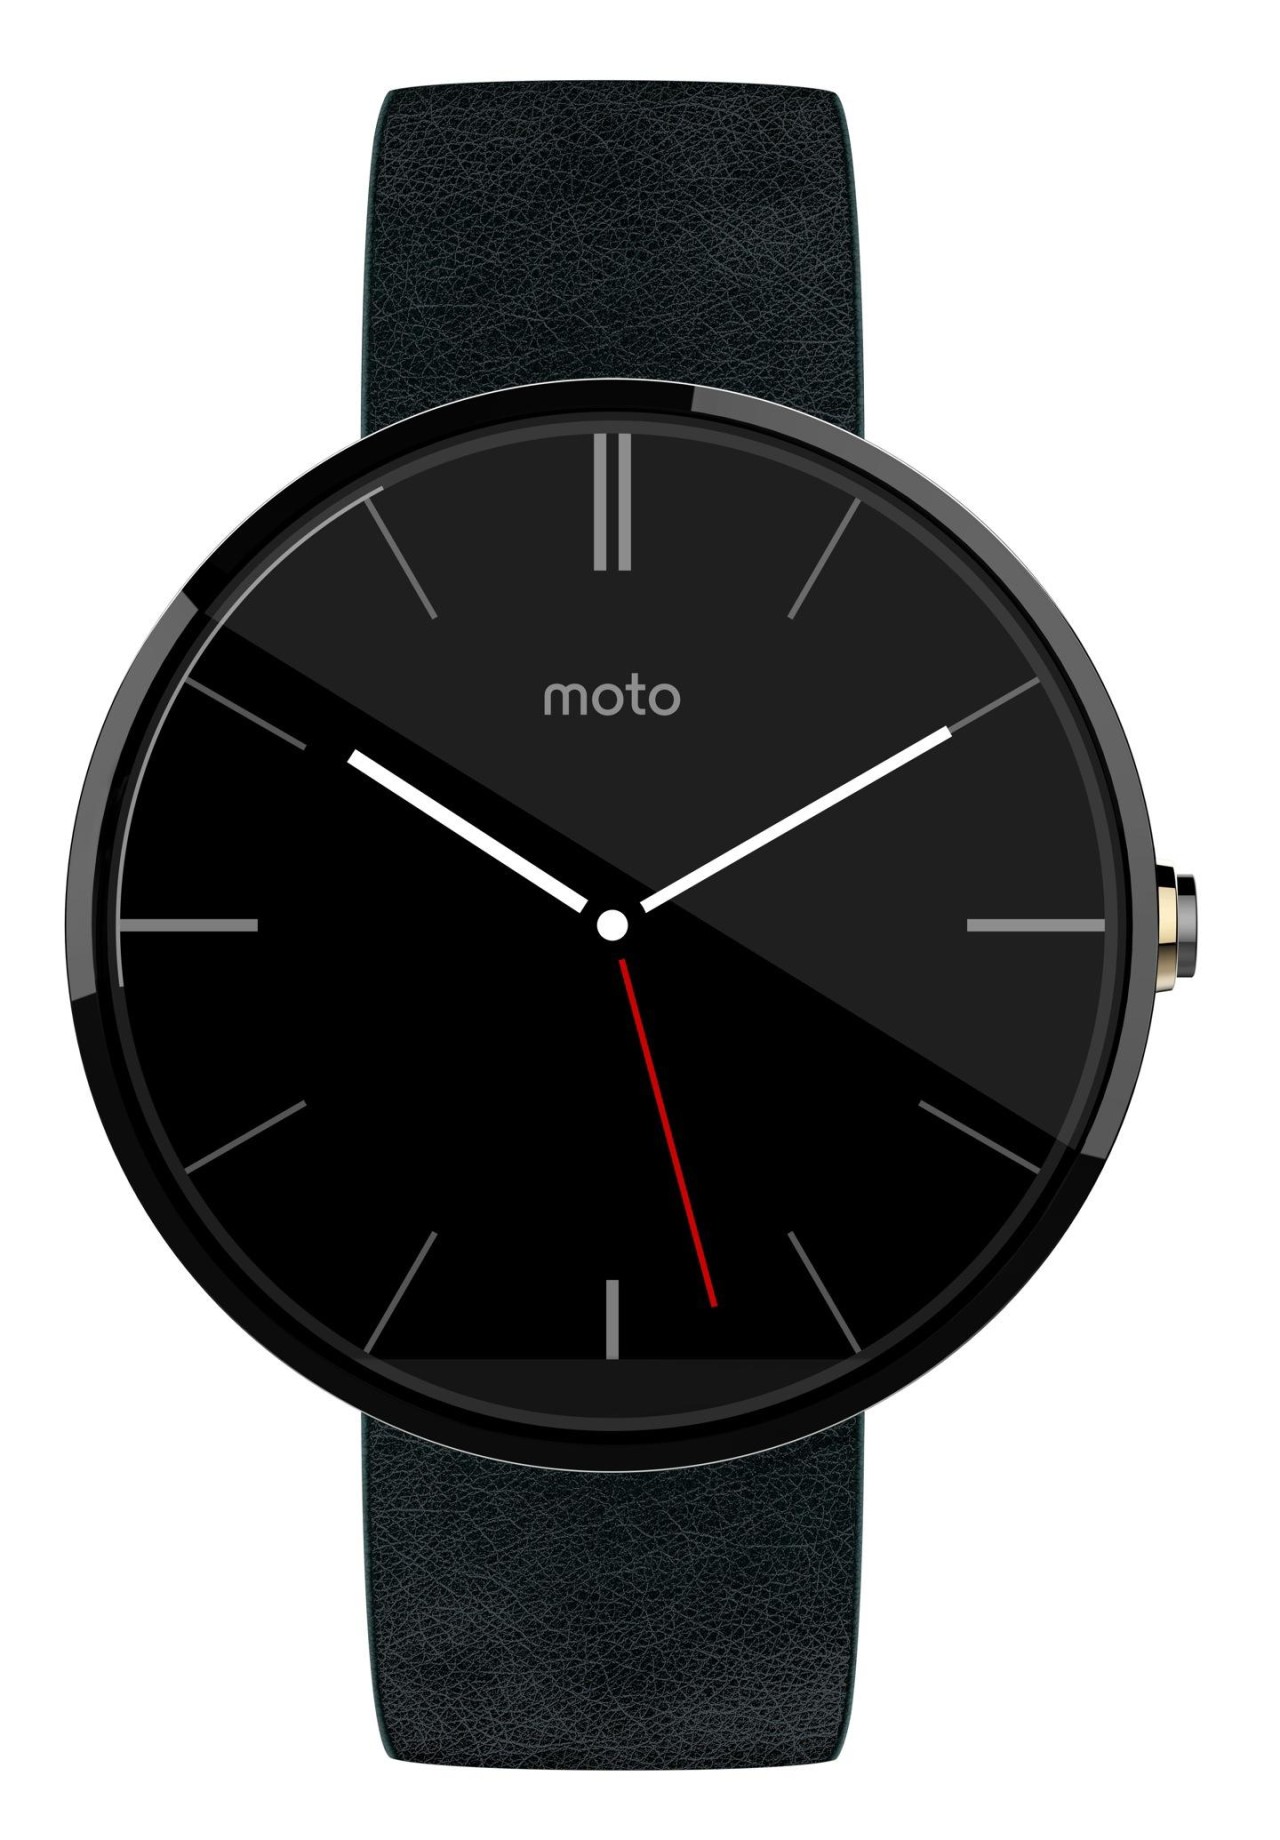 Moto 360 Press Images 5 1280x1840 - The Moto 360 is now available for $250